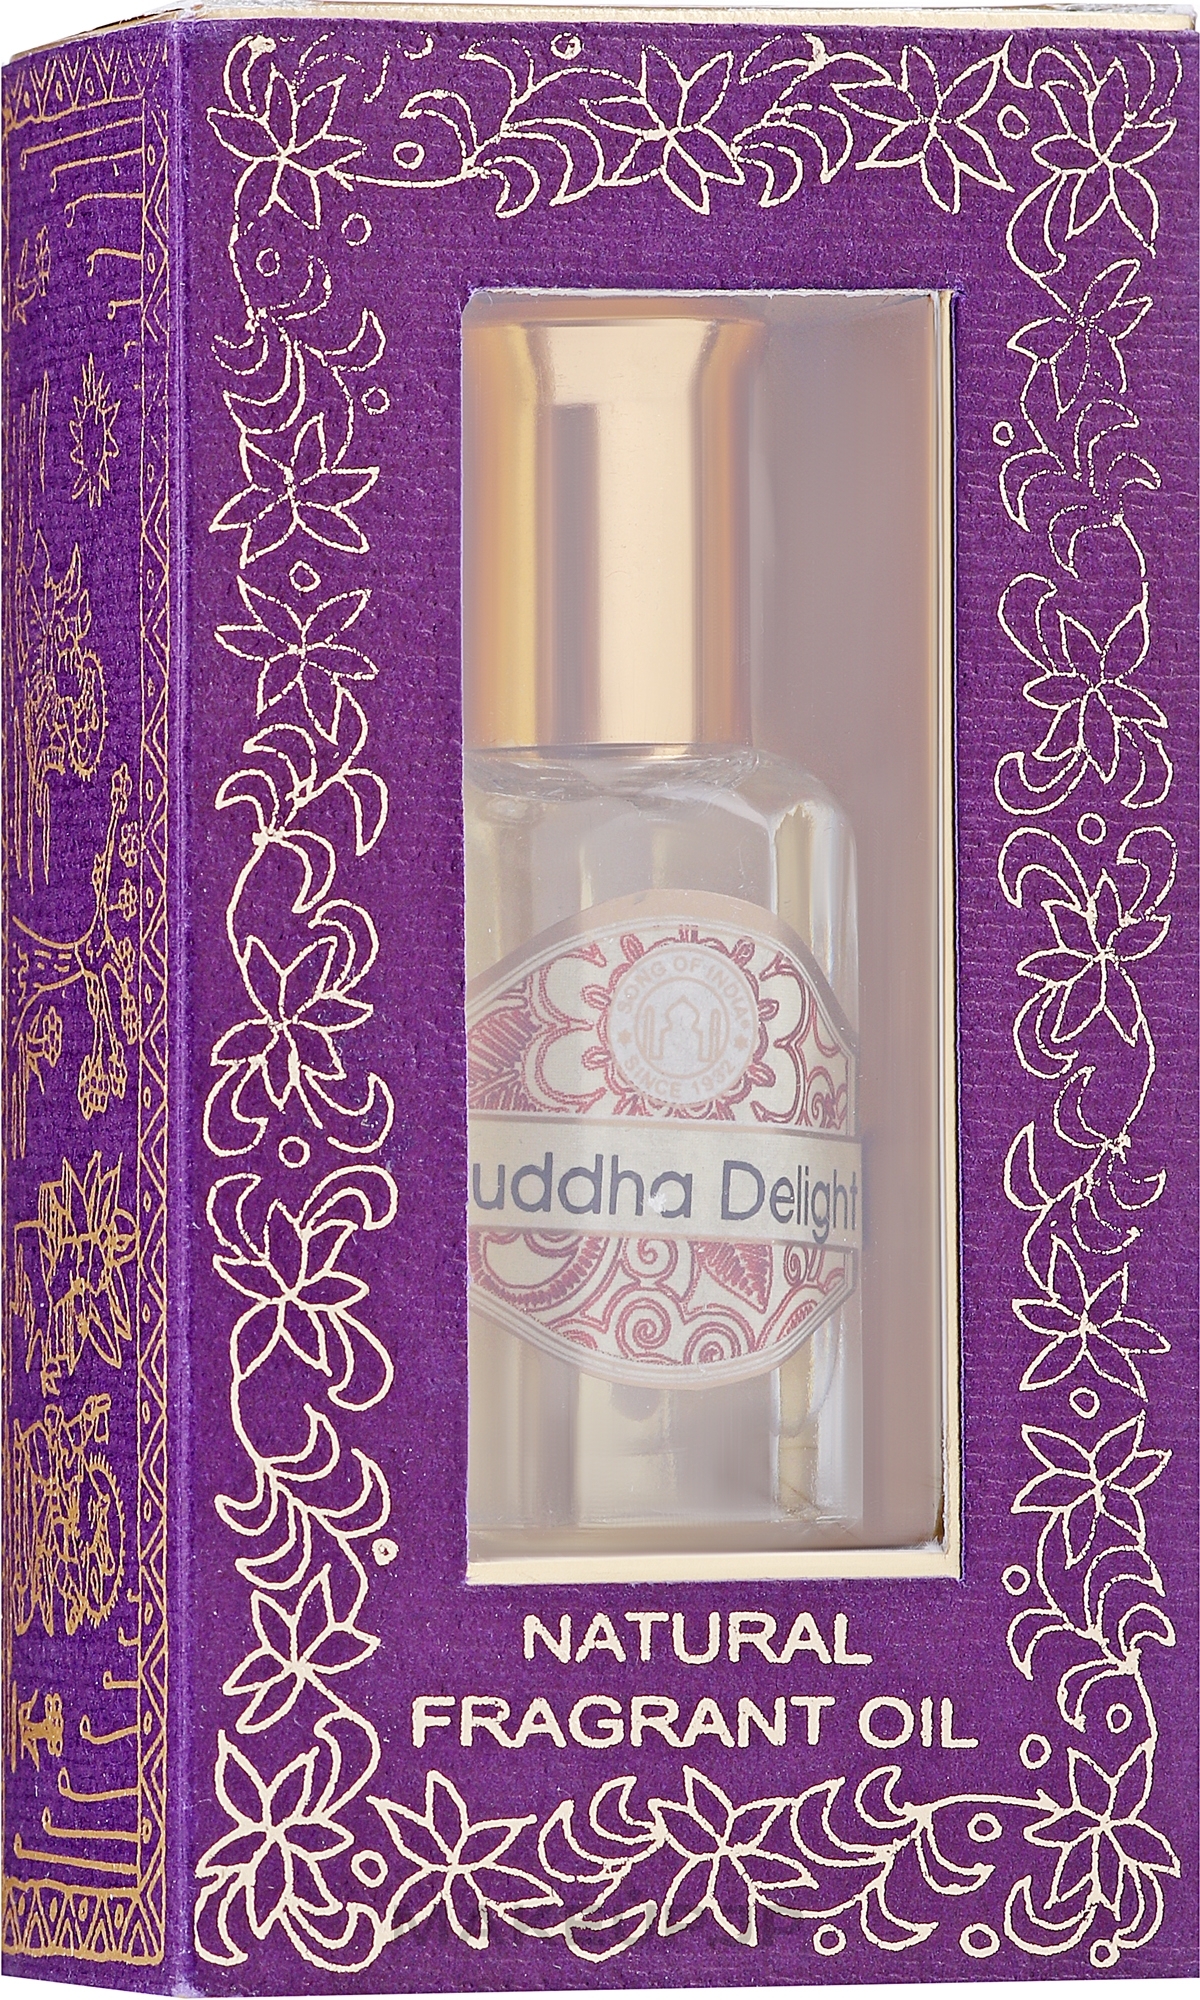 Essential Oil "Buddha" - Song of India Buddha Delight Oil  — photo 10 ml